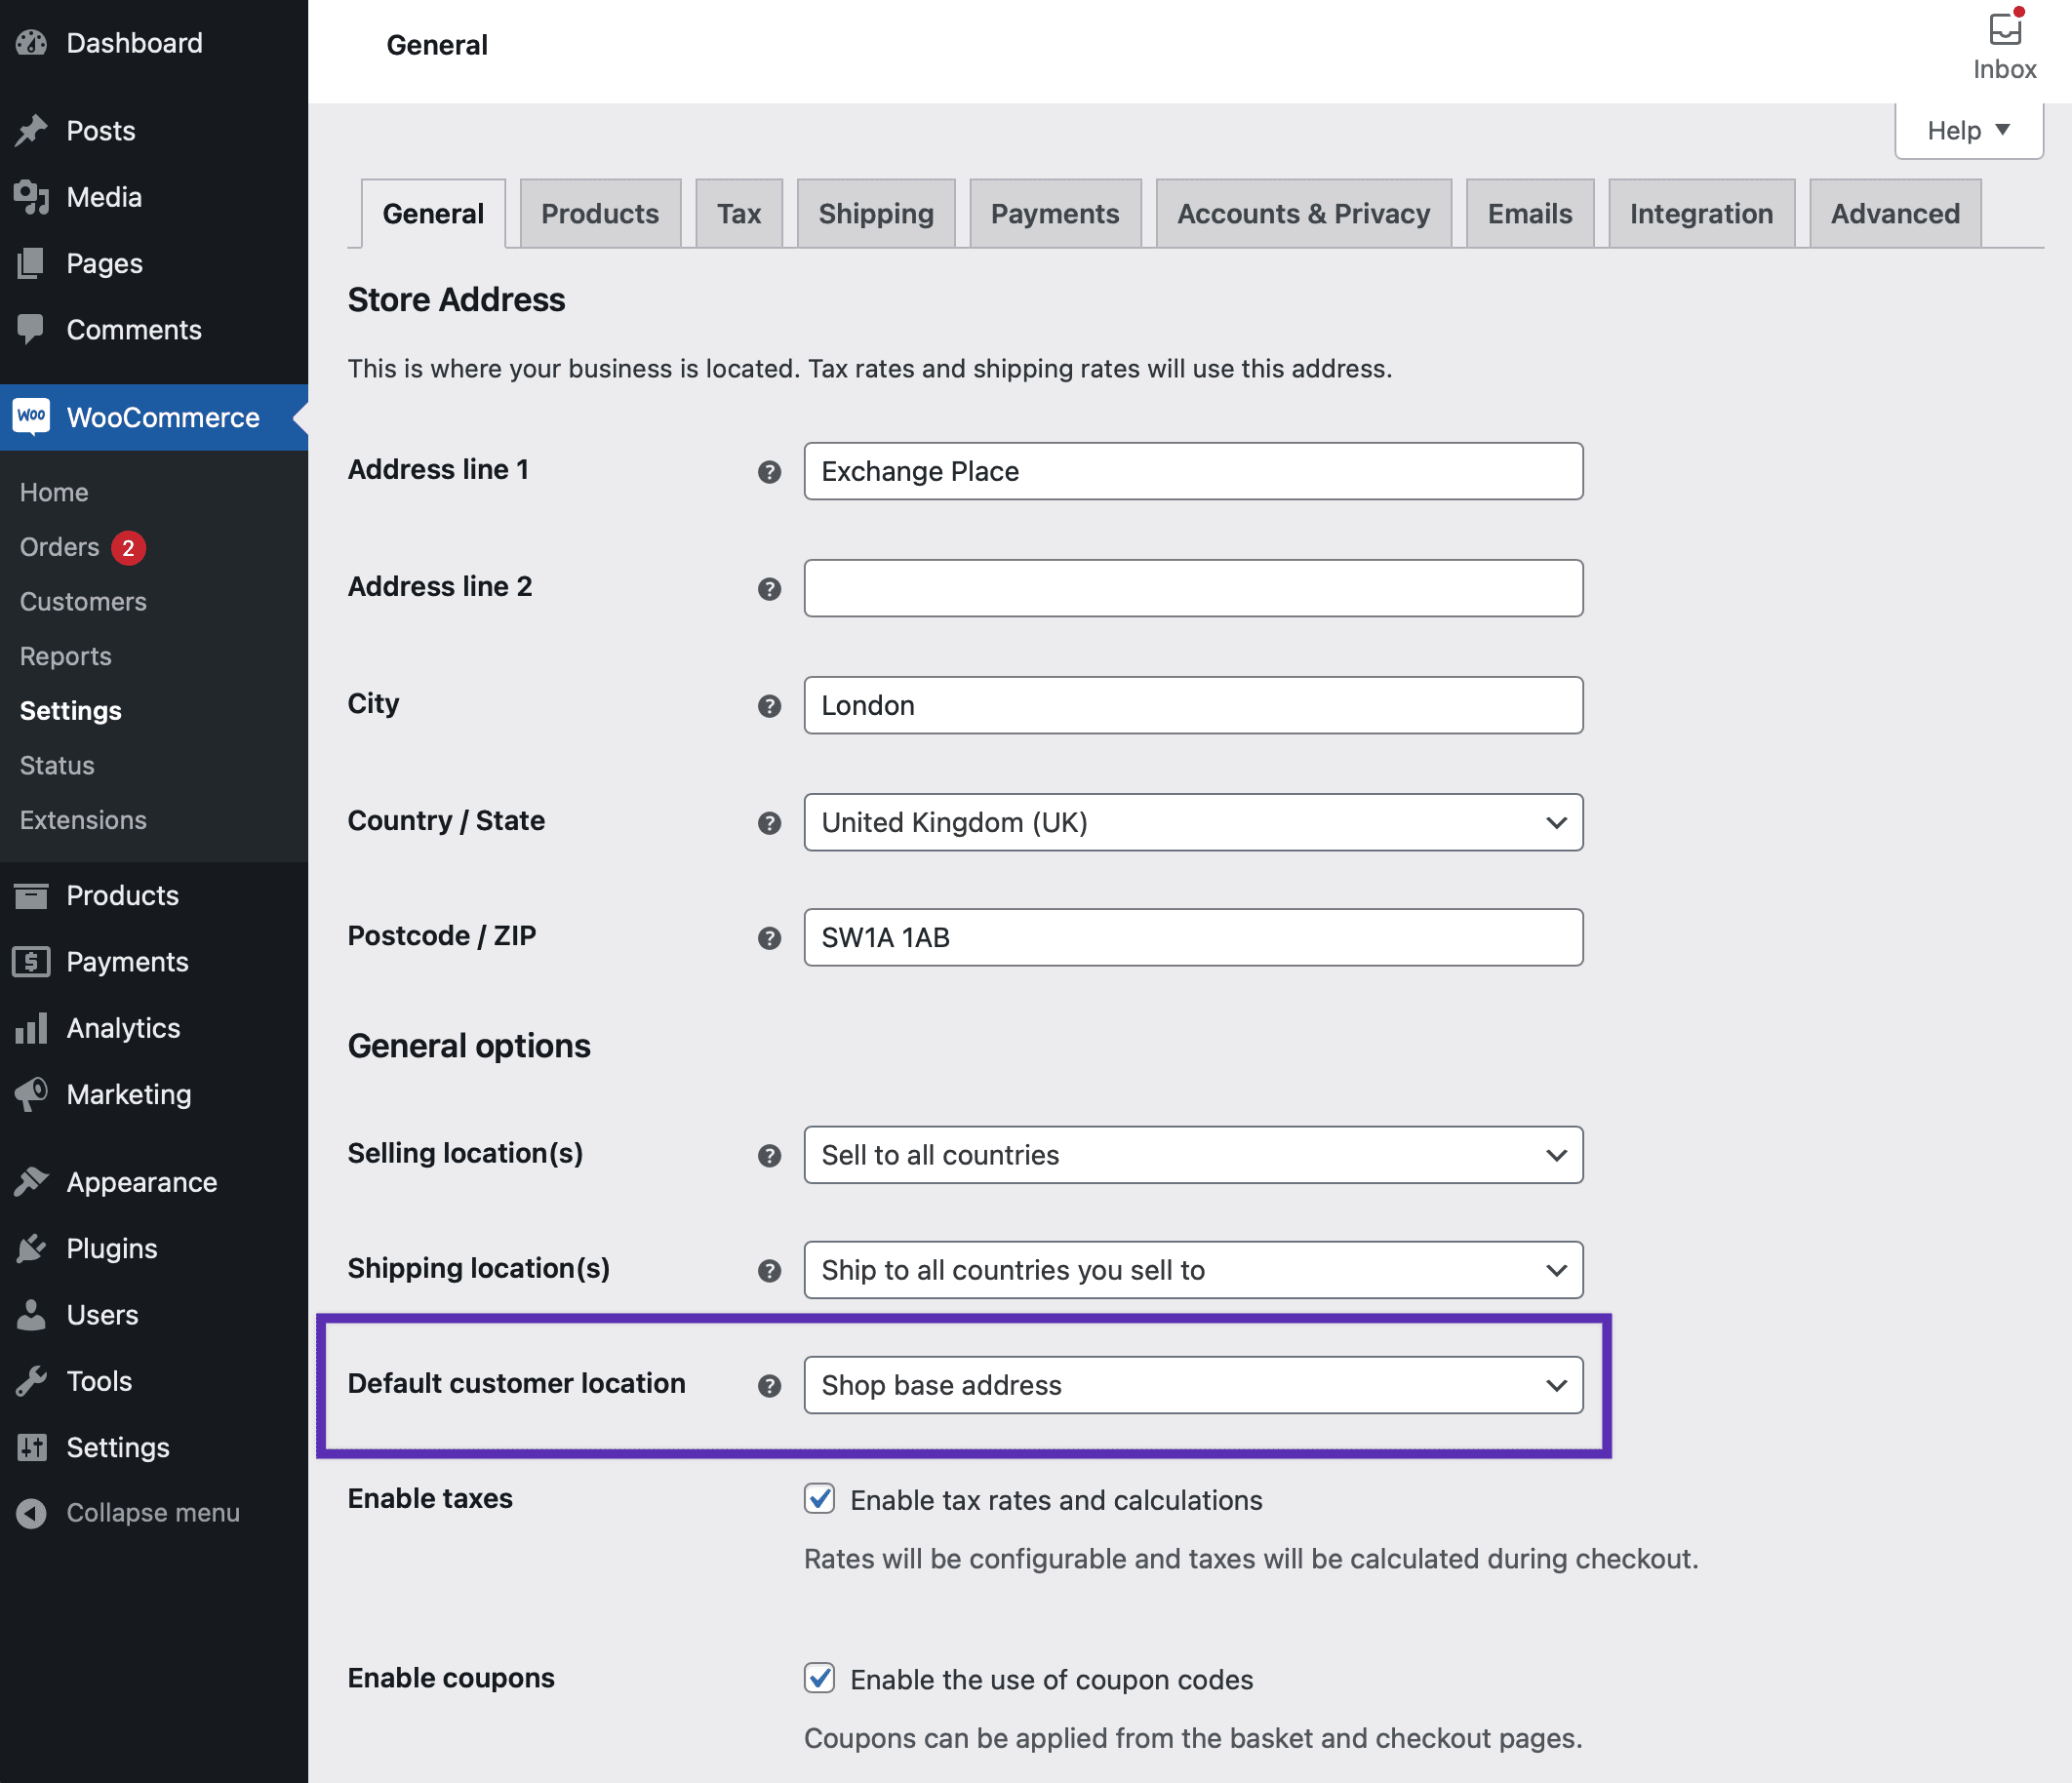 WooCommerce General Settings with a highlighted box around the setting for Default customer location, "Shop base address" is set